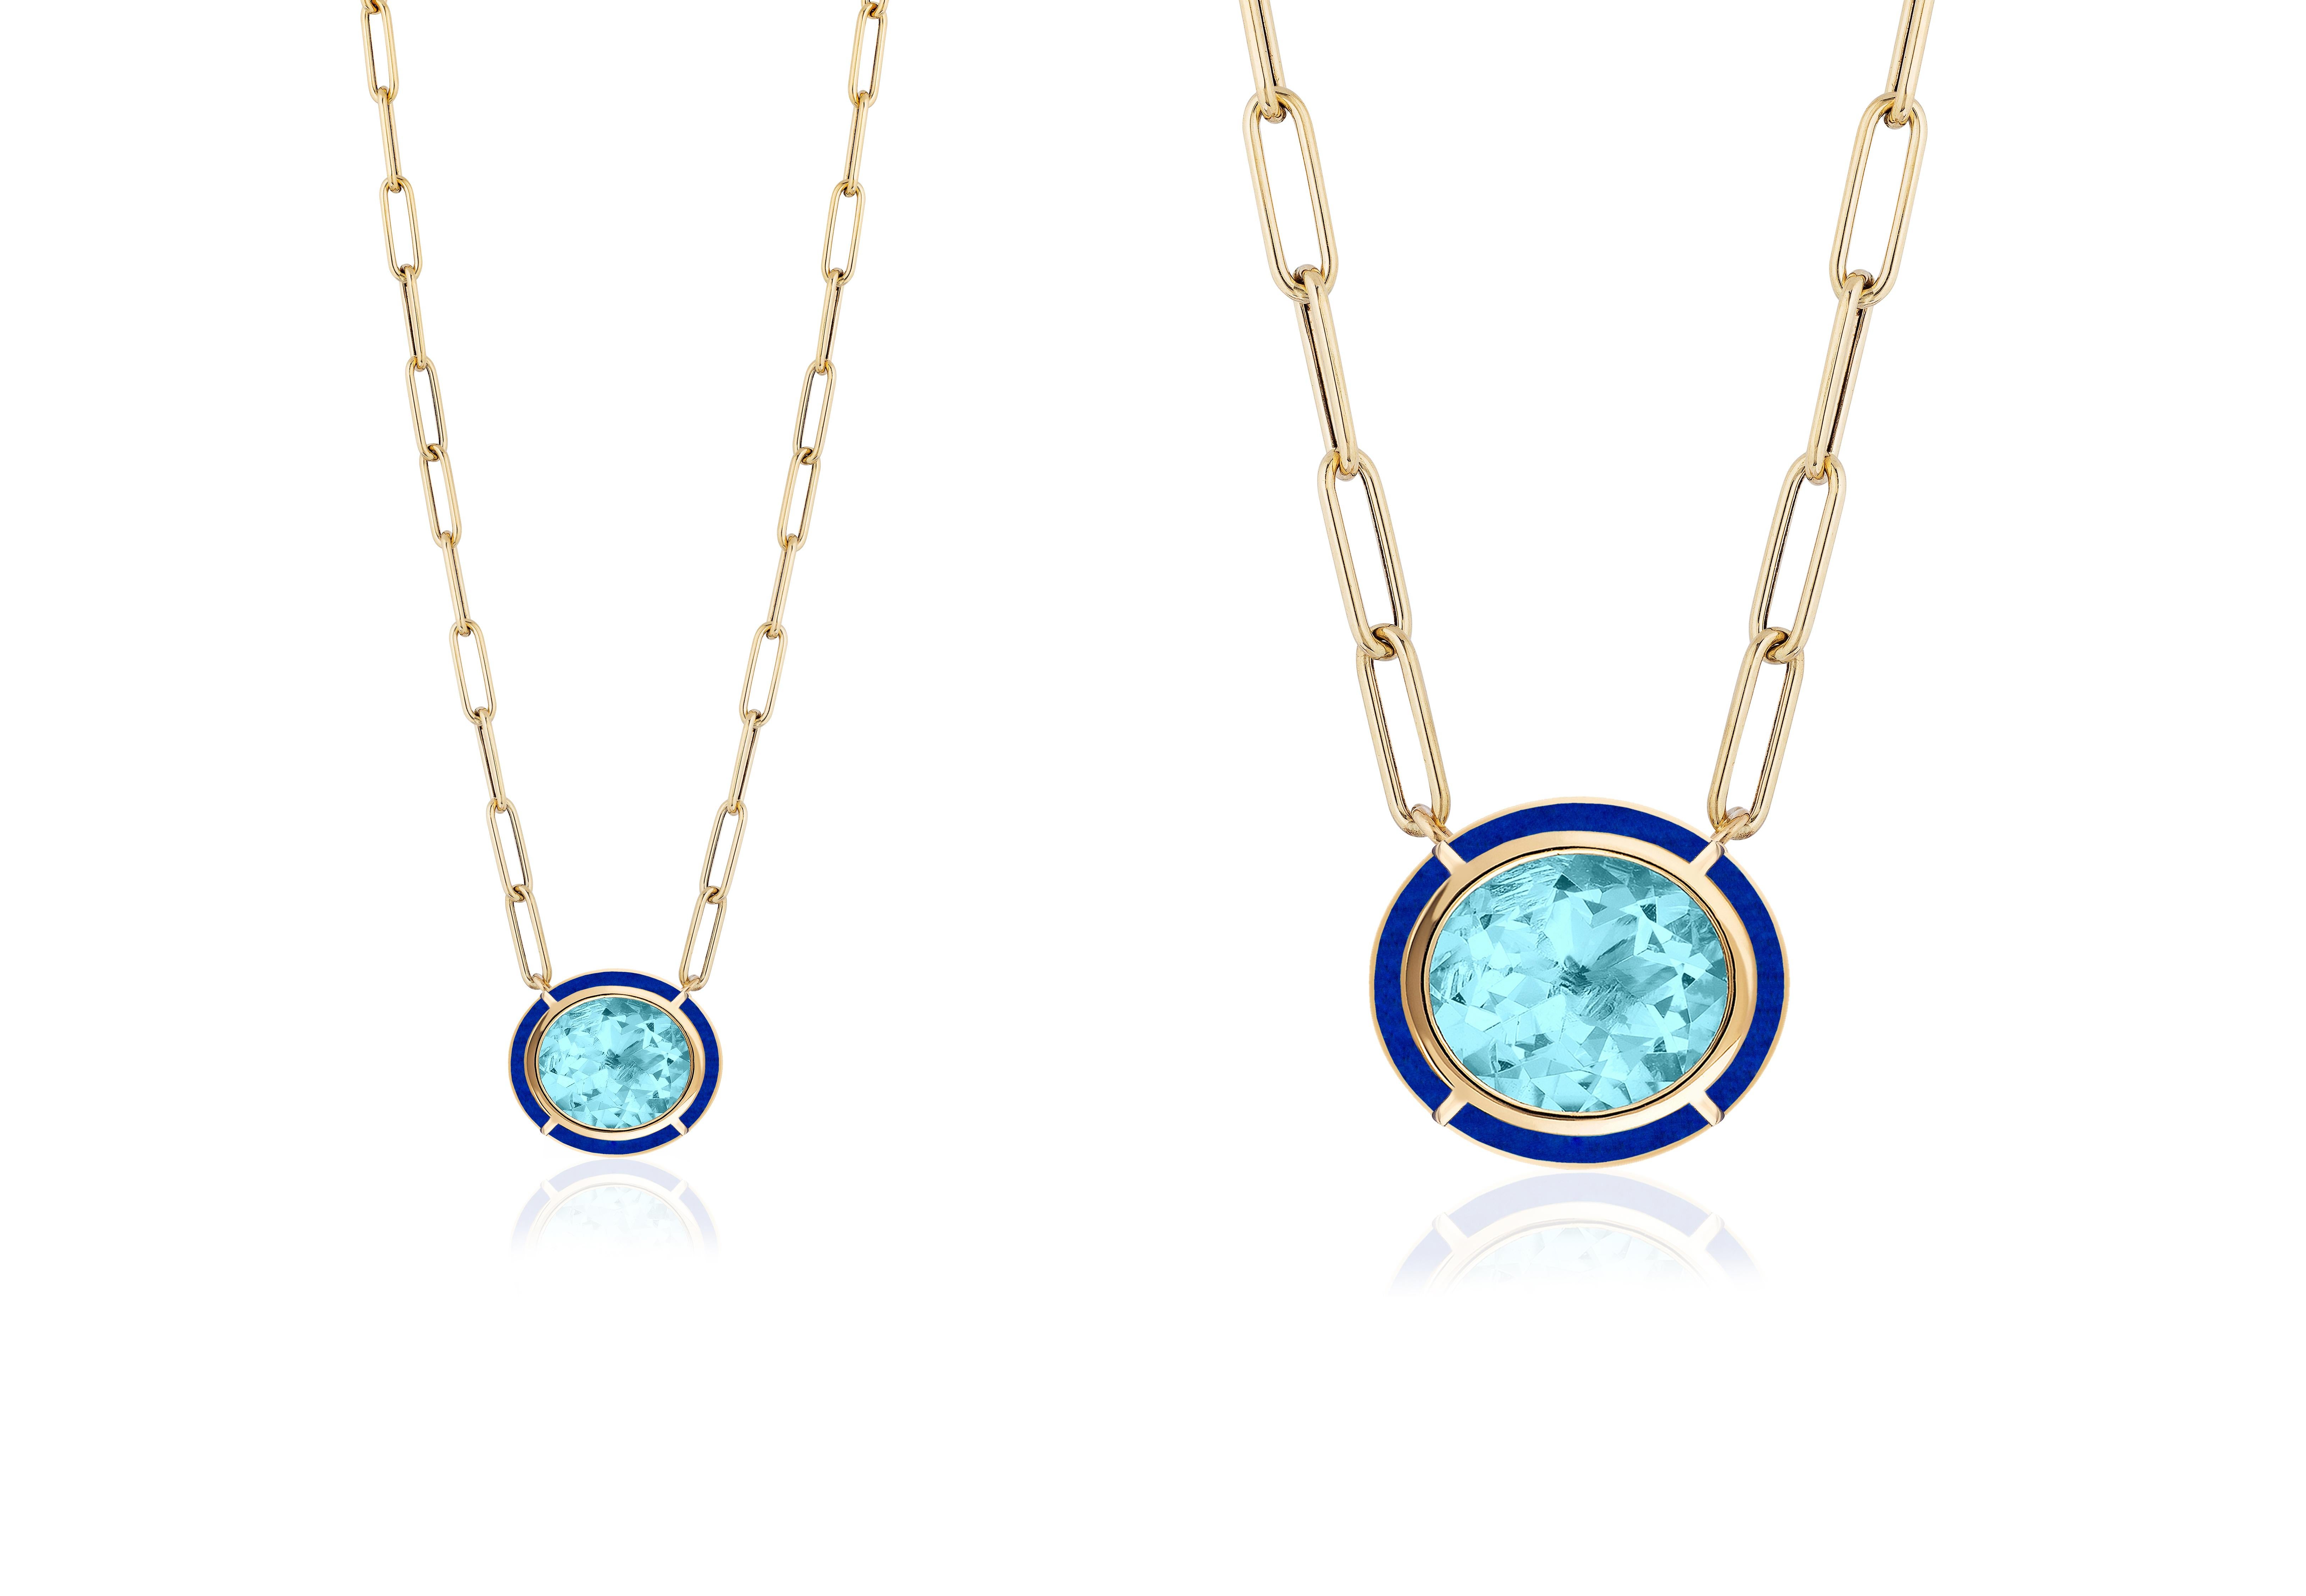 This Blue Topaz & Lapis Lazuli Inlay Oval Pendant in 18K Yellow Gold is a stunning piece of jewelry from the 'Mélange' Collection. The pendant features an oval-shaped Blue Topaz surrounded by a Lapis Lazuli stone, both set in 18K Yellow gold. The